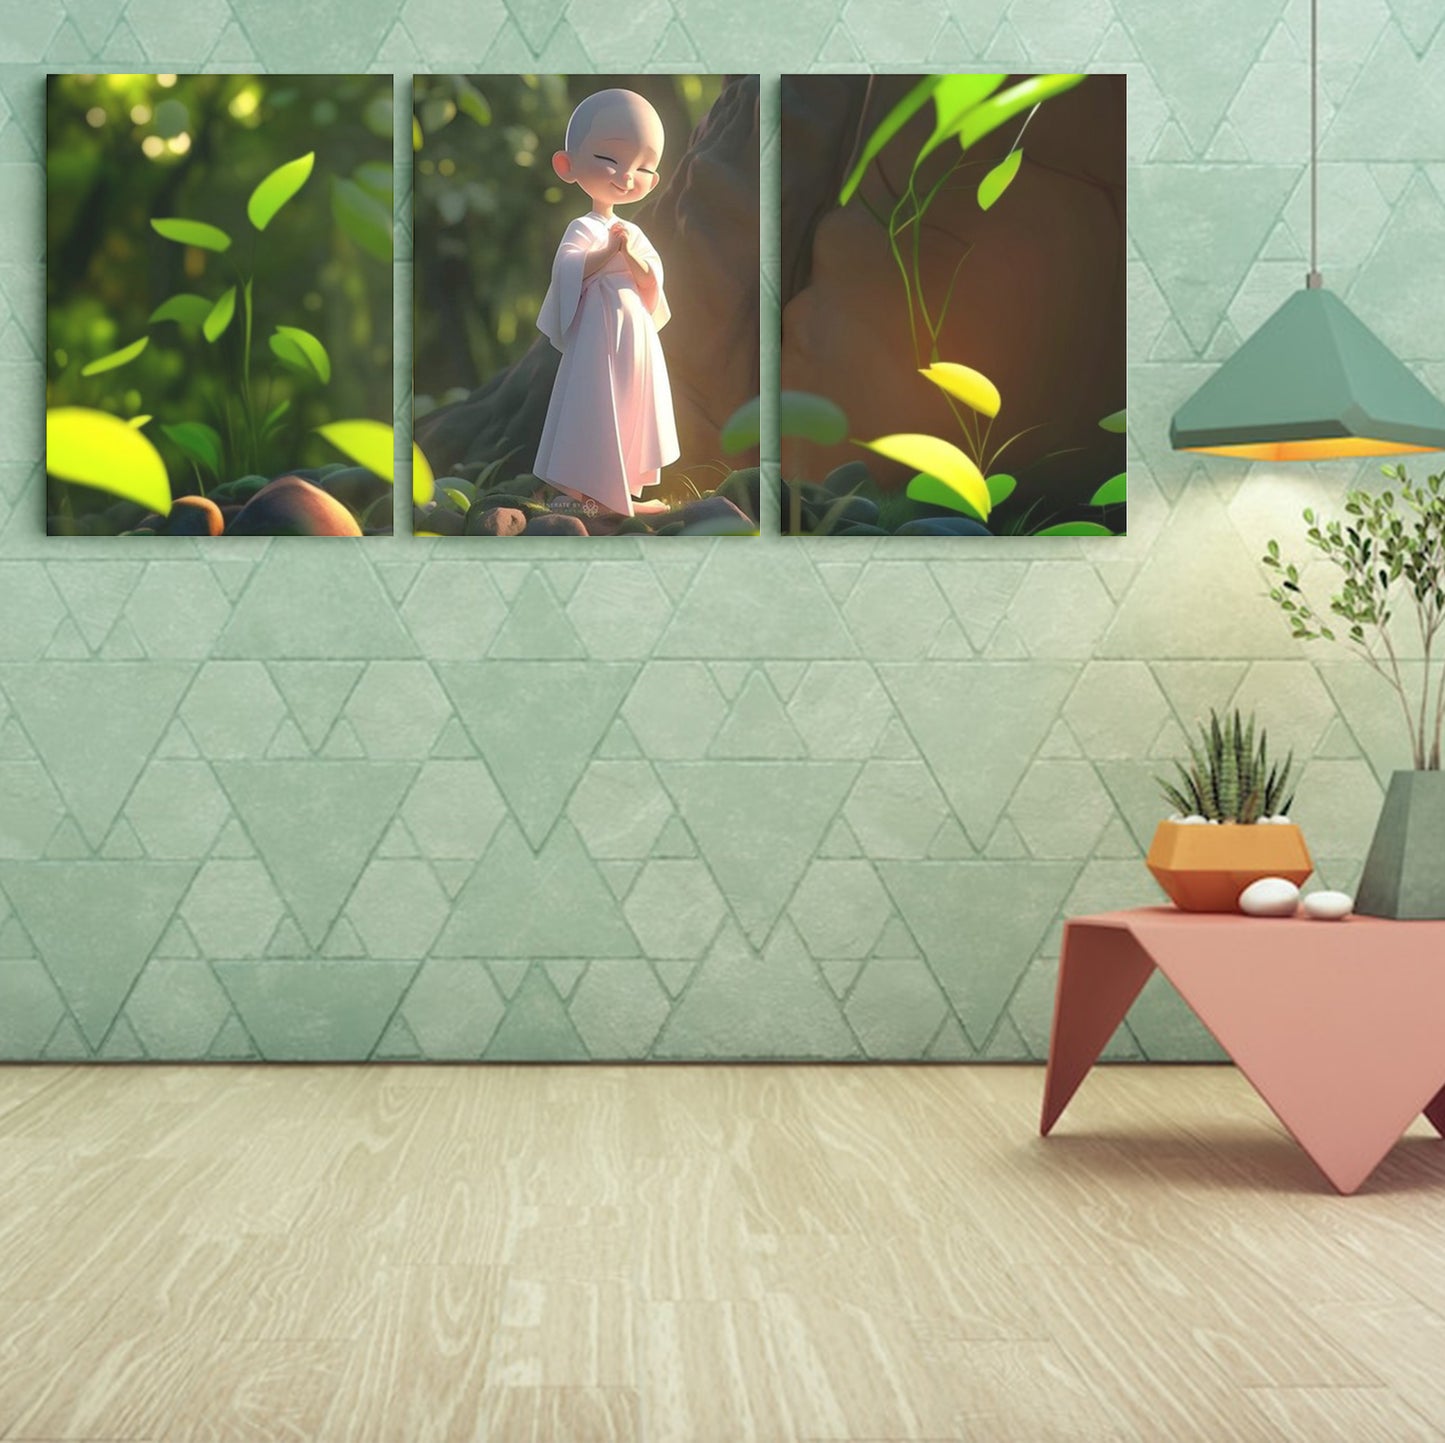 Tranquil Reverie: A Wall Art Capturing a Monk's Serenity in a Forest - Cultivate Inner Peace and Reflection through Nature's Embrace - S05E71